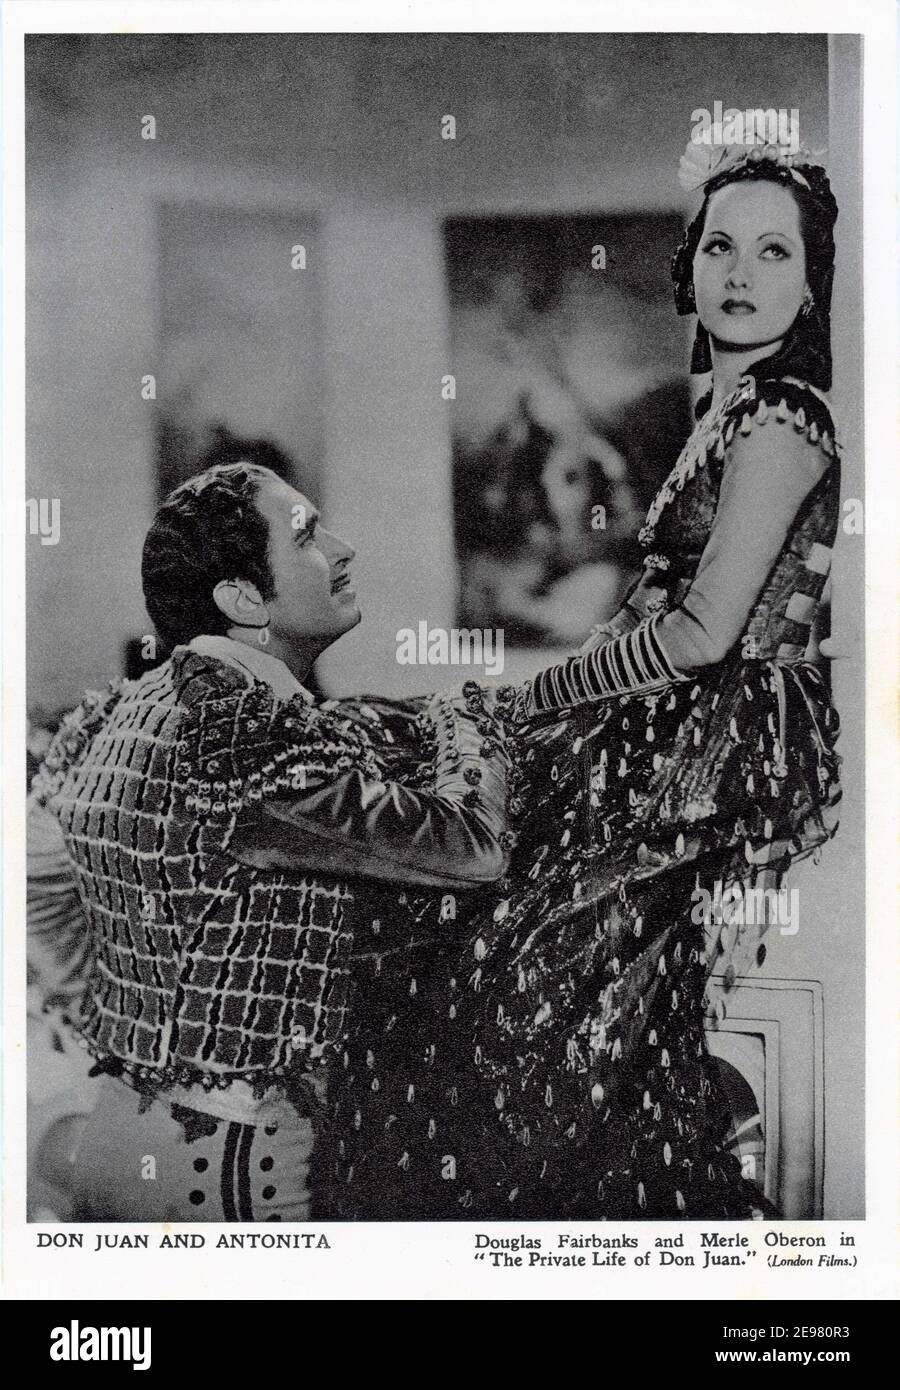 DOUGLAS FAIRBANKS Sr and MERLE OBERON in THE PRIVATE LIFE OF DON JUAN 1934 director / producer ALEXANDER KORDA play Henry Bataille story/dialogue Frederick Lonsdale and Lajos Biro costumes Oliver Messel London Film Productions / United Artists Stock Photo